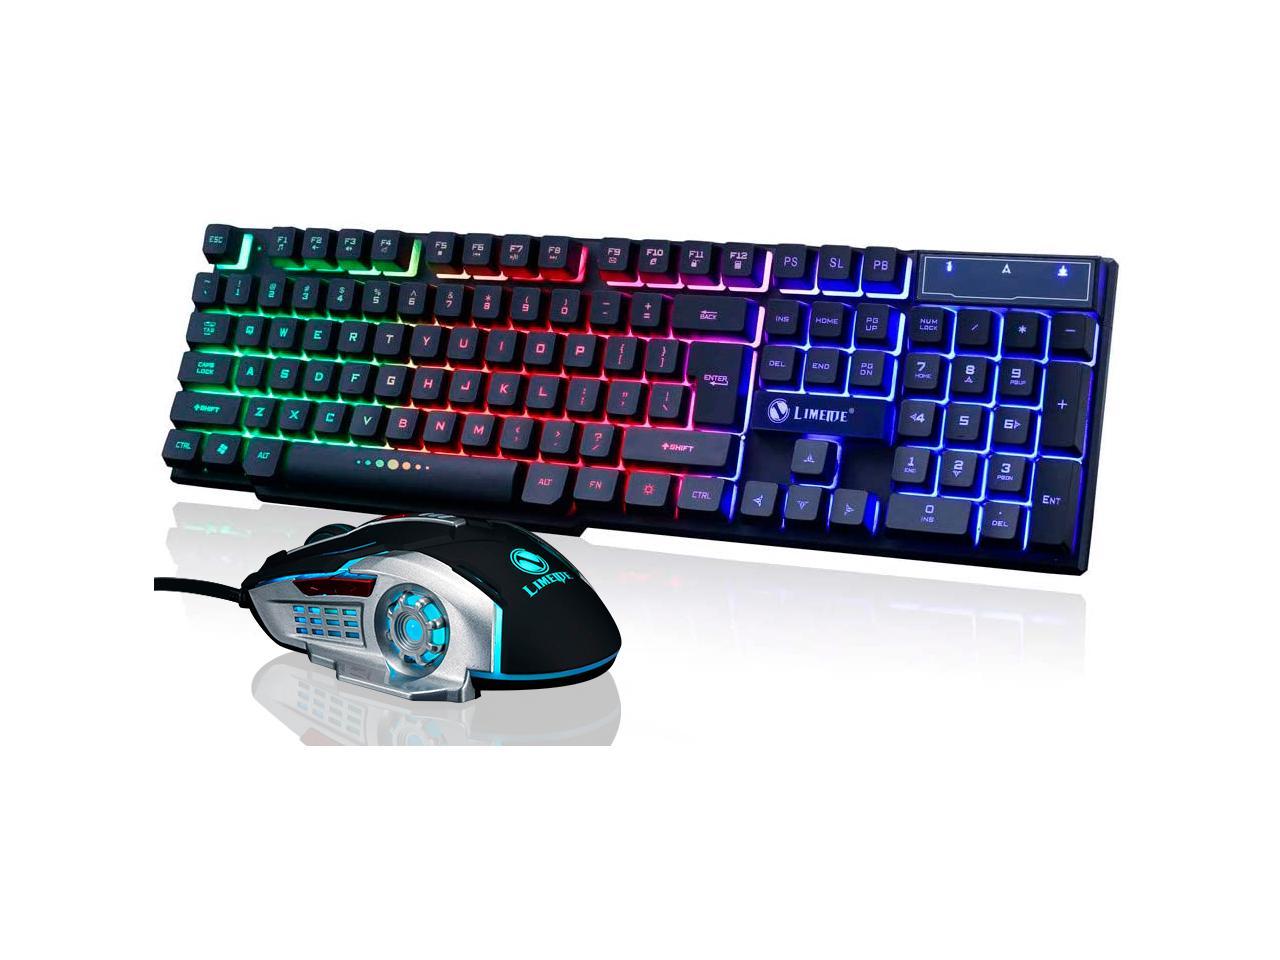 Smooth Wired Keyboard Keyboard MouseCombo Illuminated USB Wired Keyboard Computer Accessory for Office for Gaming